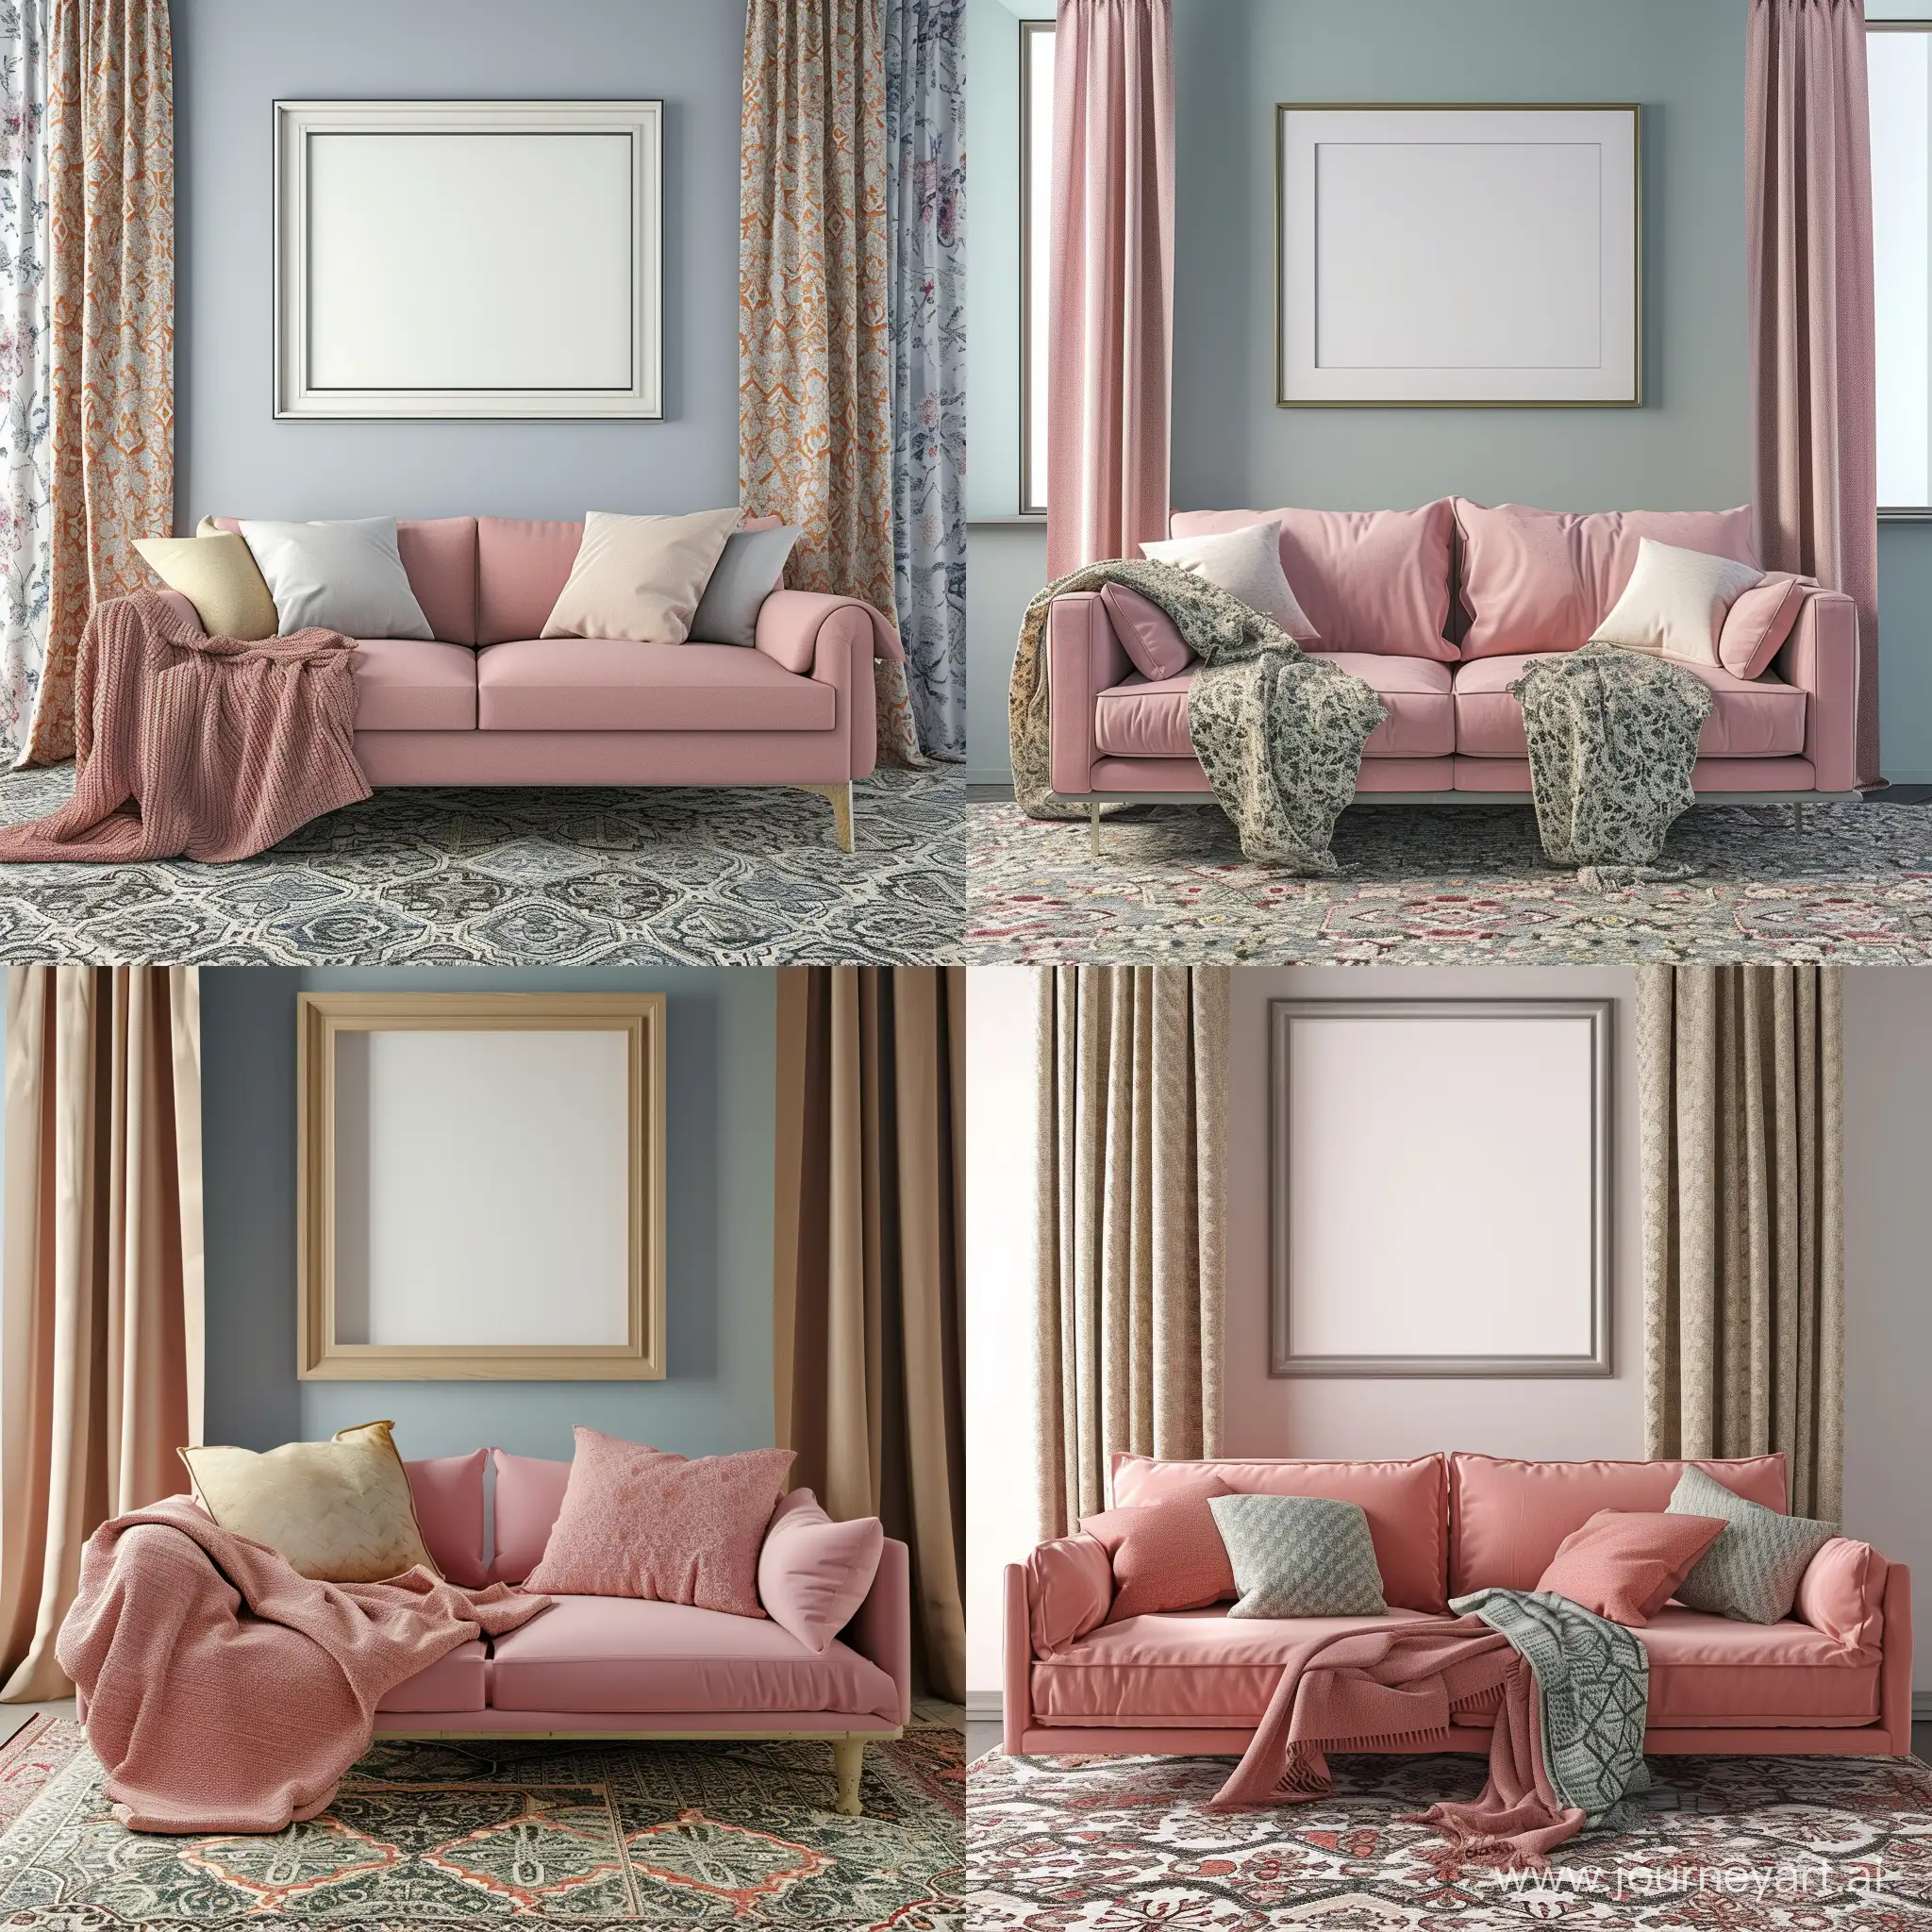 Cozy-Pink-Sofa-in-Stylish-Interior-with-Blankets-and-Pillows